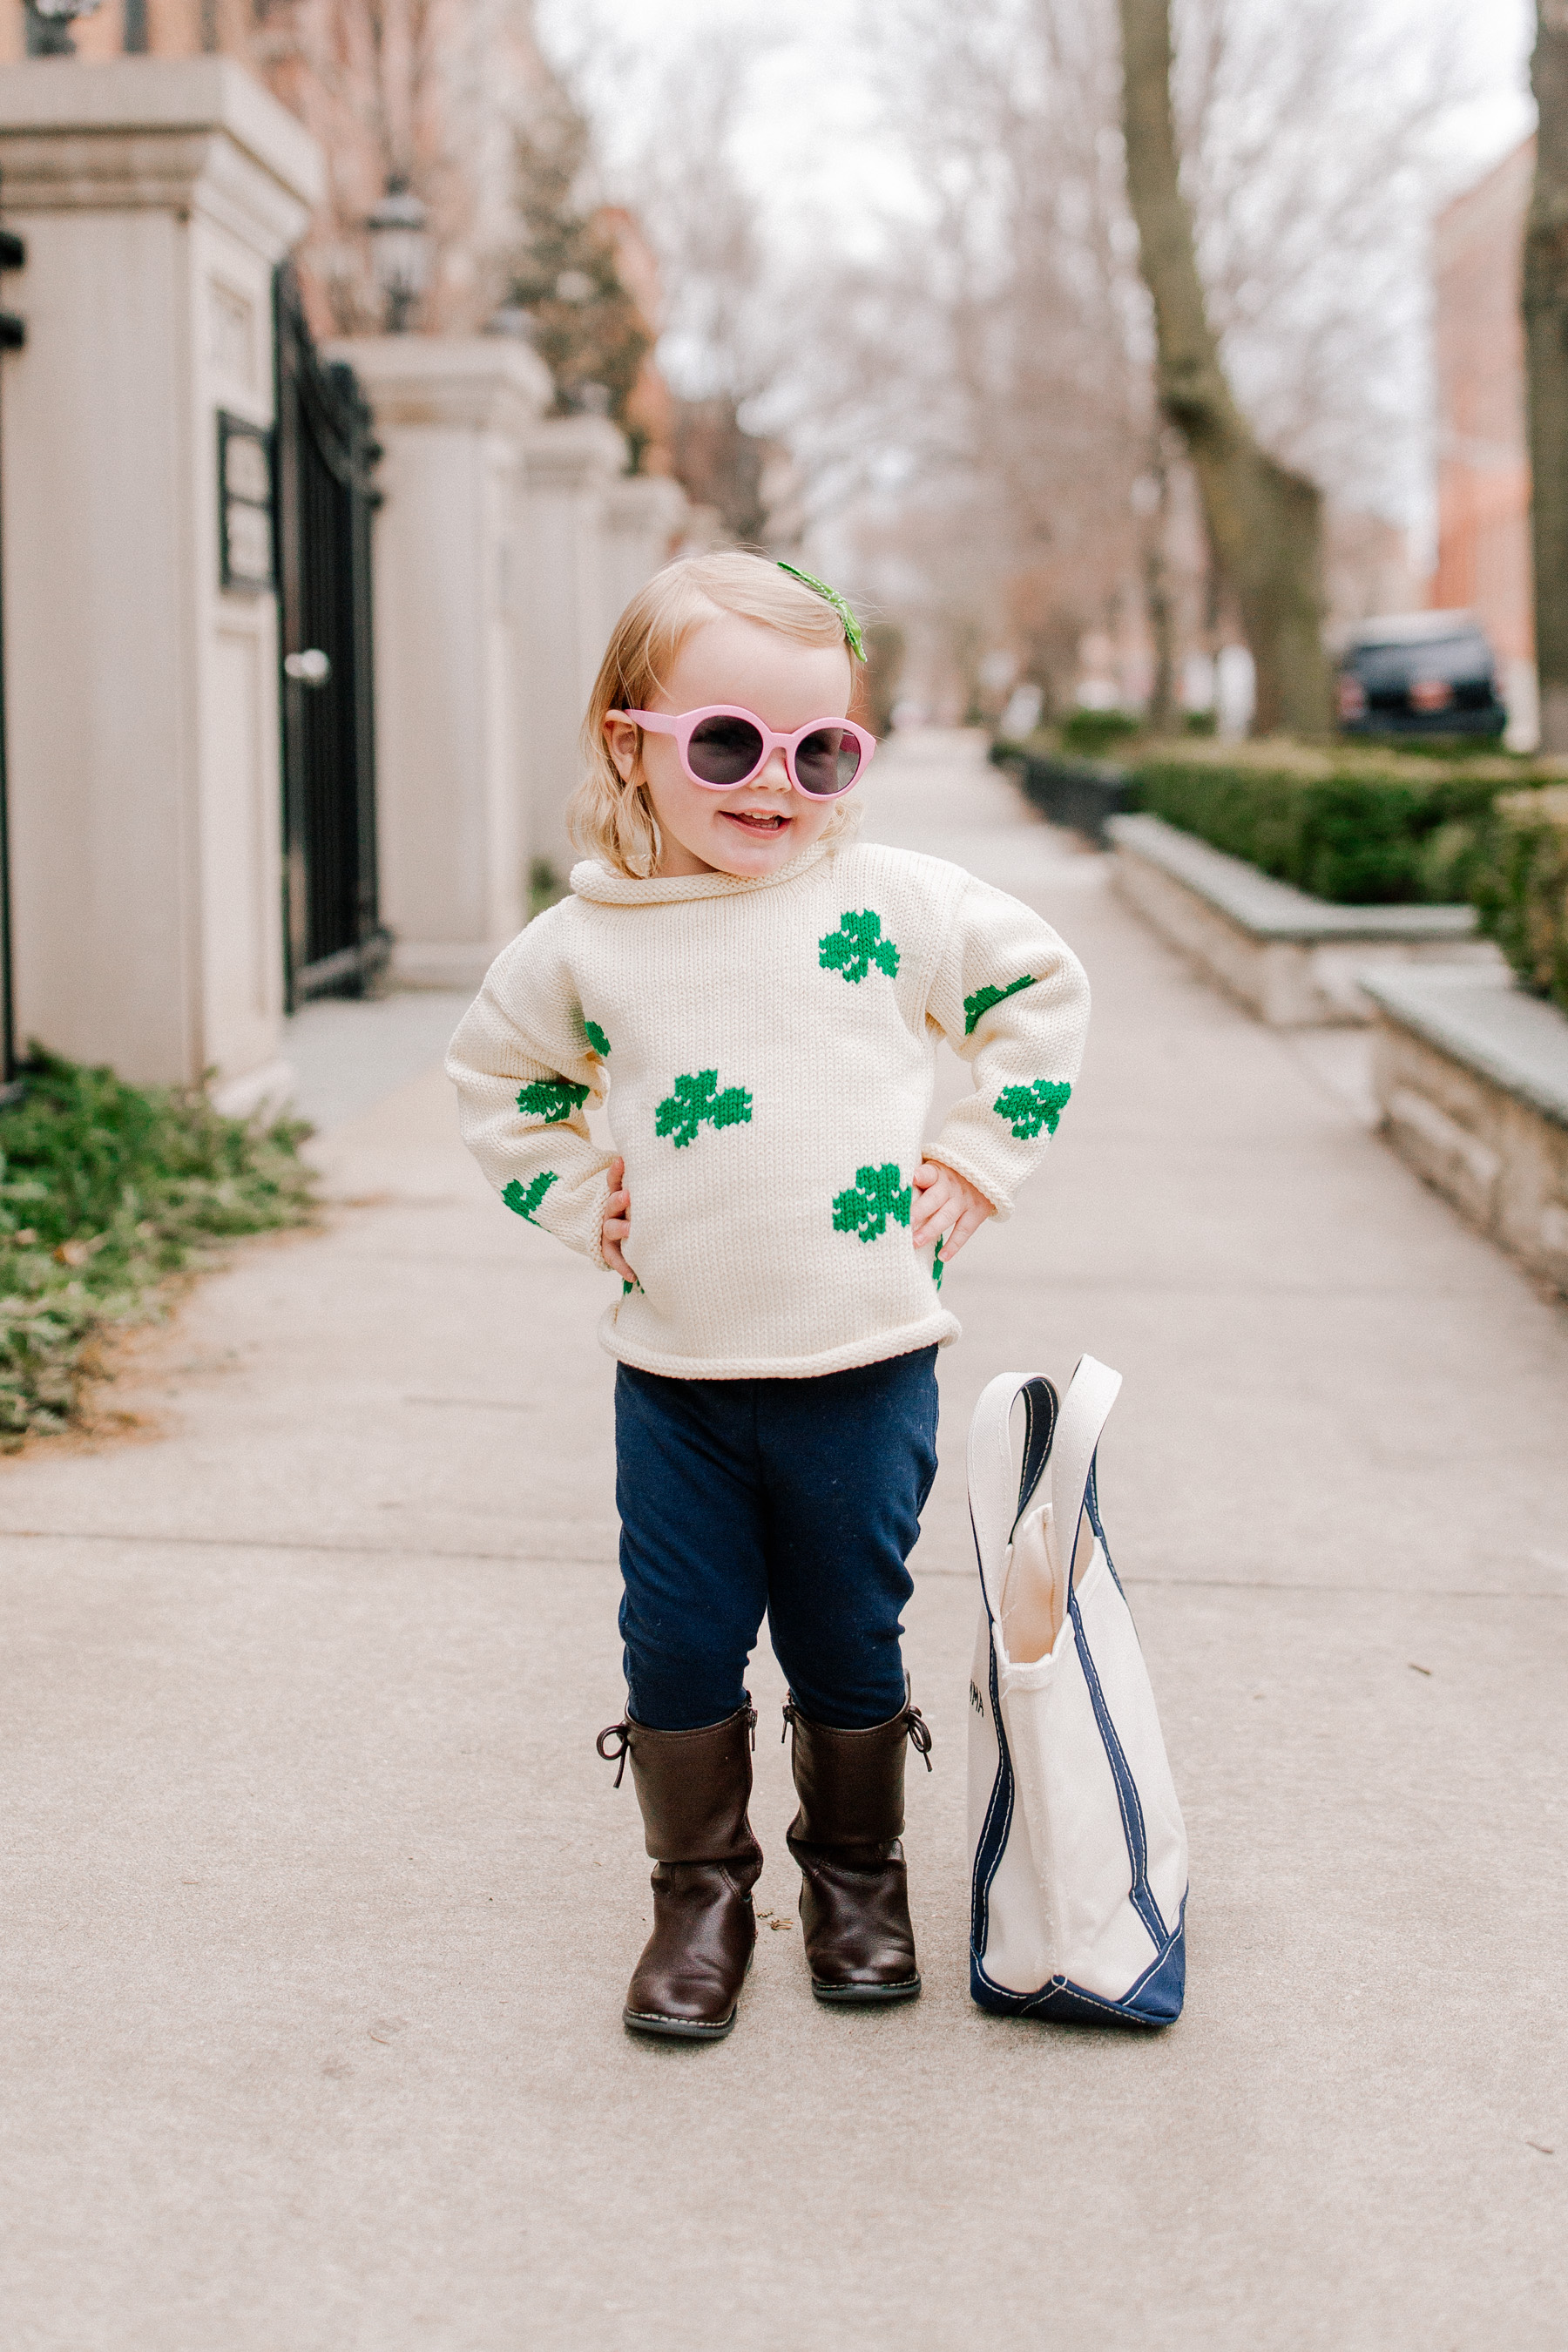 Emma is featuring a Claver Shamrock Sweater / L.L. Bean Tote c/o / Gap Kids Jeggings and Boots / Janie & Jack Sunglasses / Little Makes Big Bow c/o